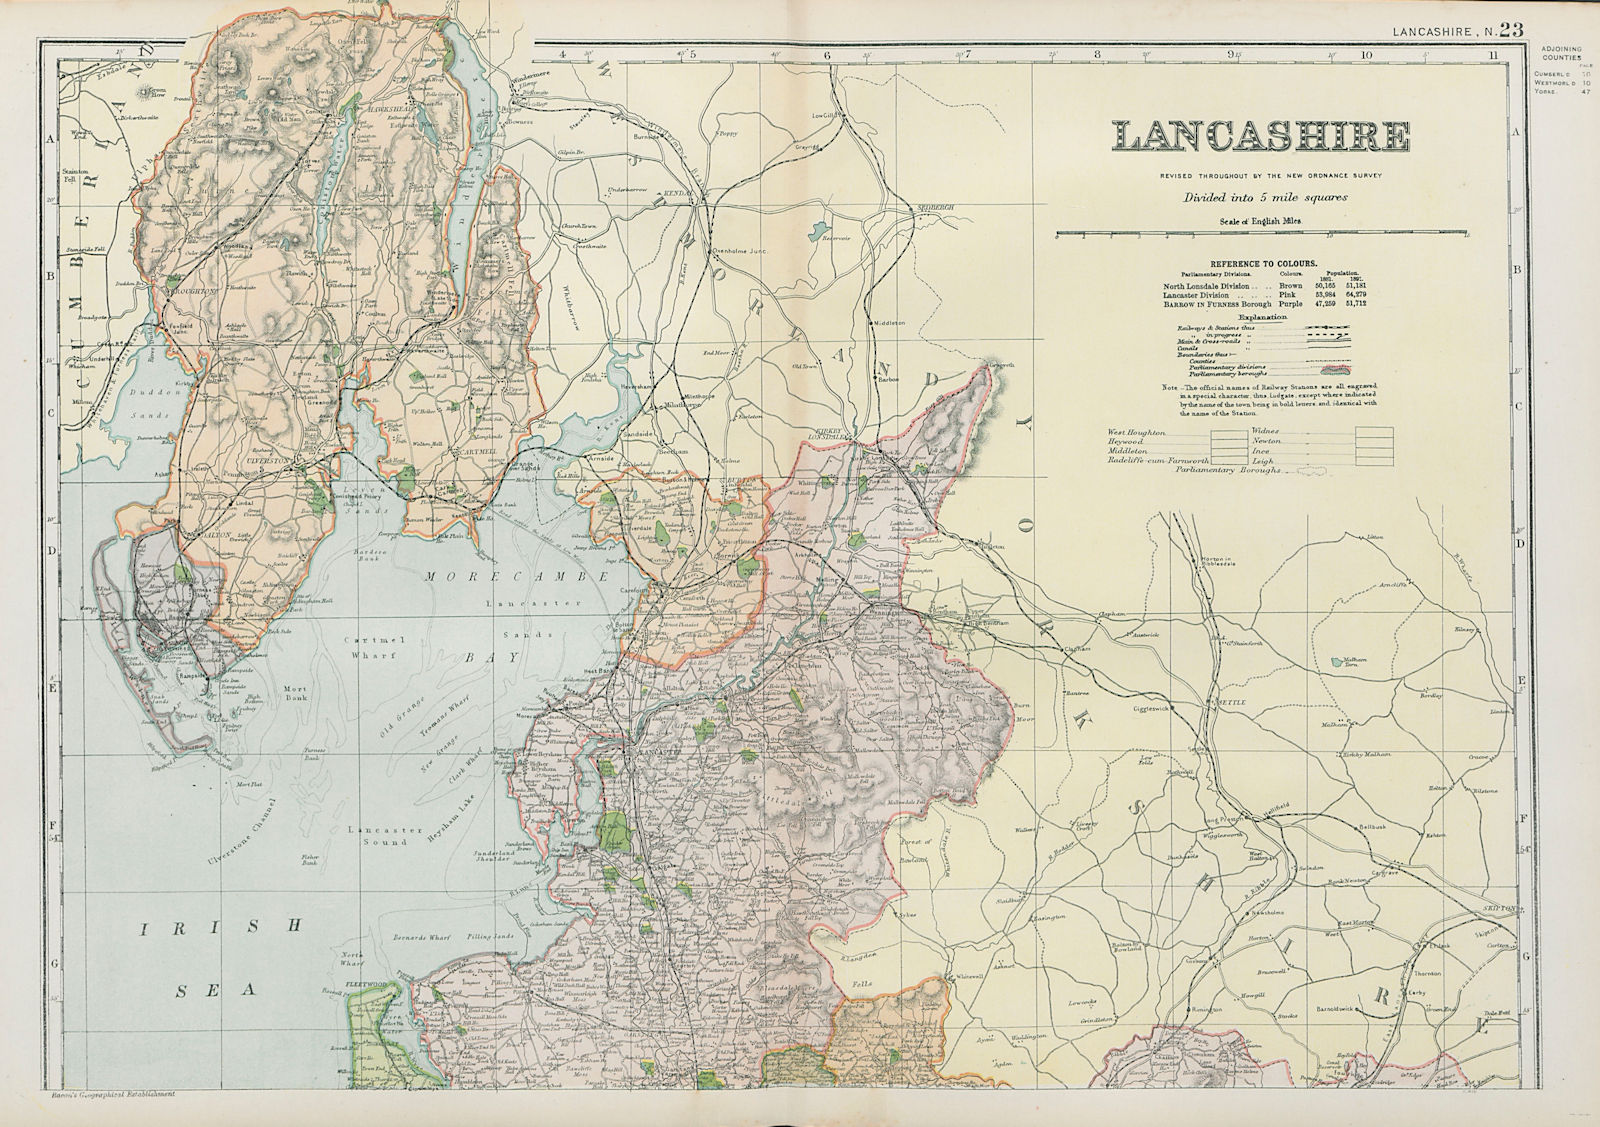 LANCASHIRE (NORTH) . Showing Parliamentary divisions & parks. BACON 1900 map